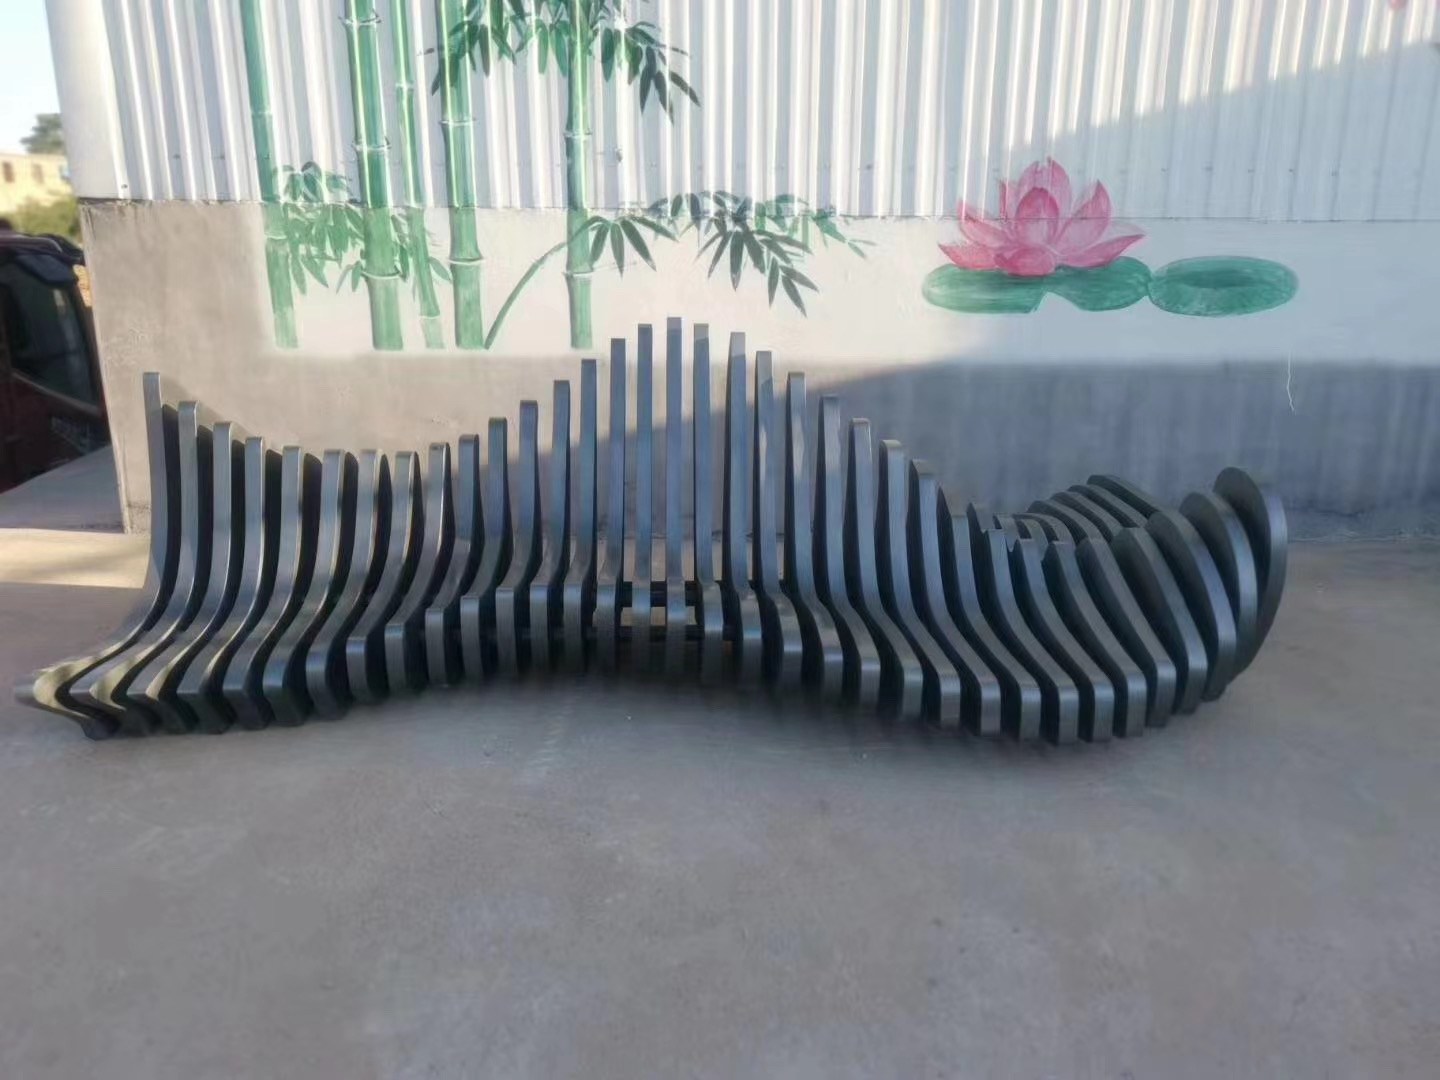 stainless steel mesh public art benches (2)